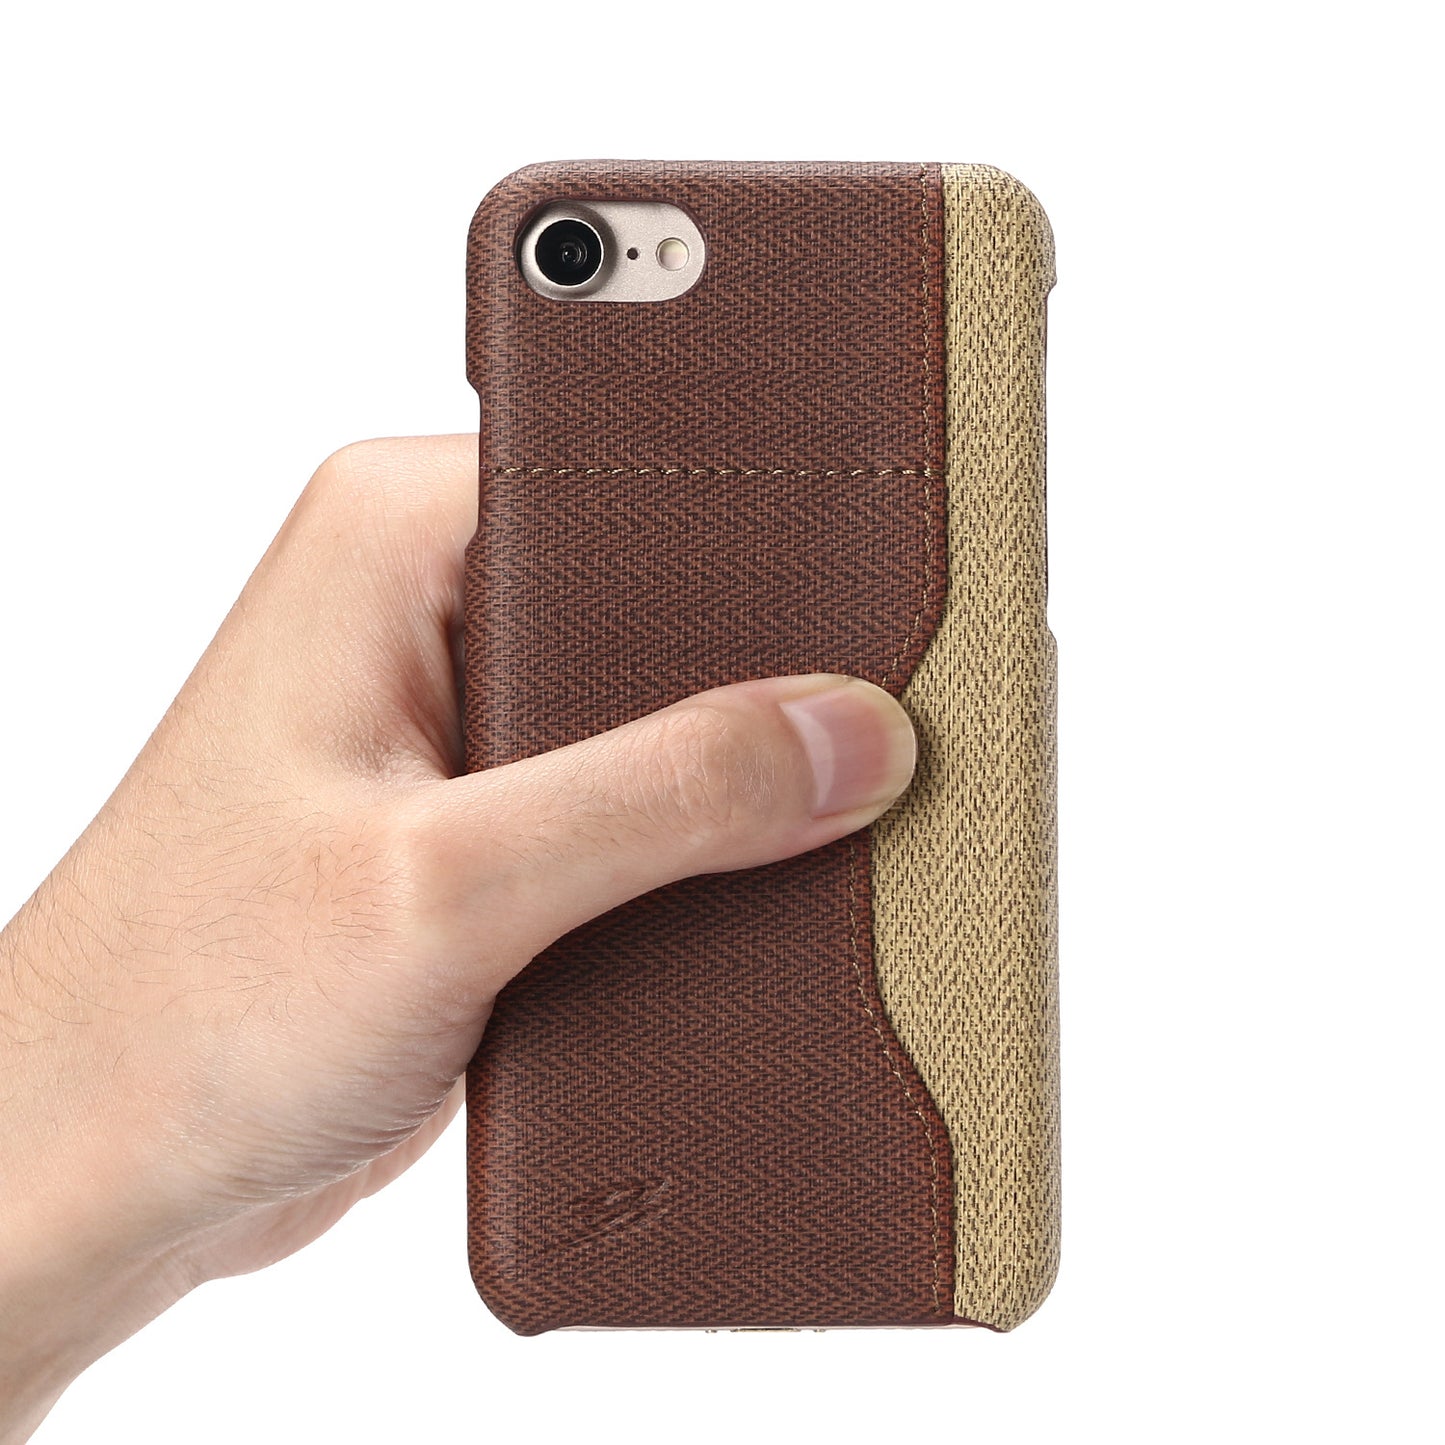 iPhone Leather Case: 8 Card Back Cover Protective Shell - Back Cover (Shipping Not Included)